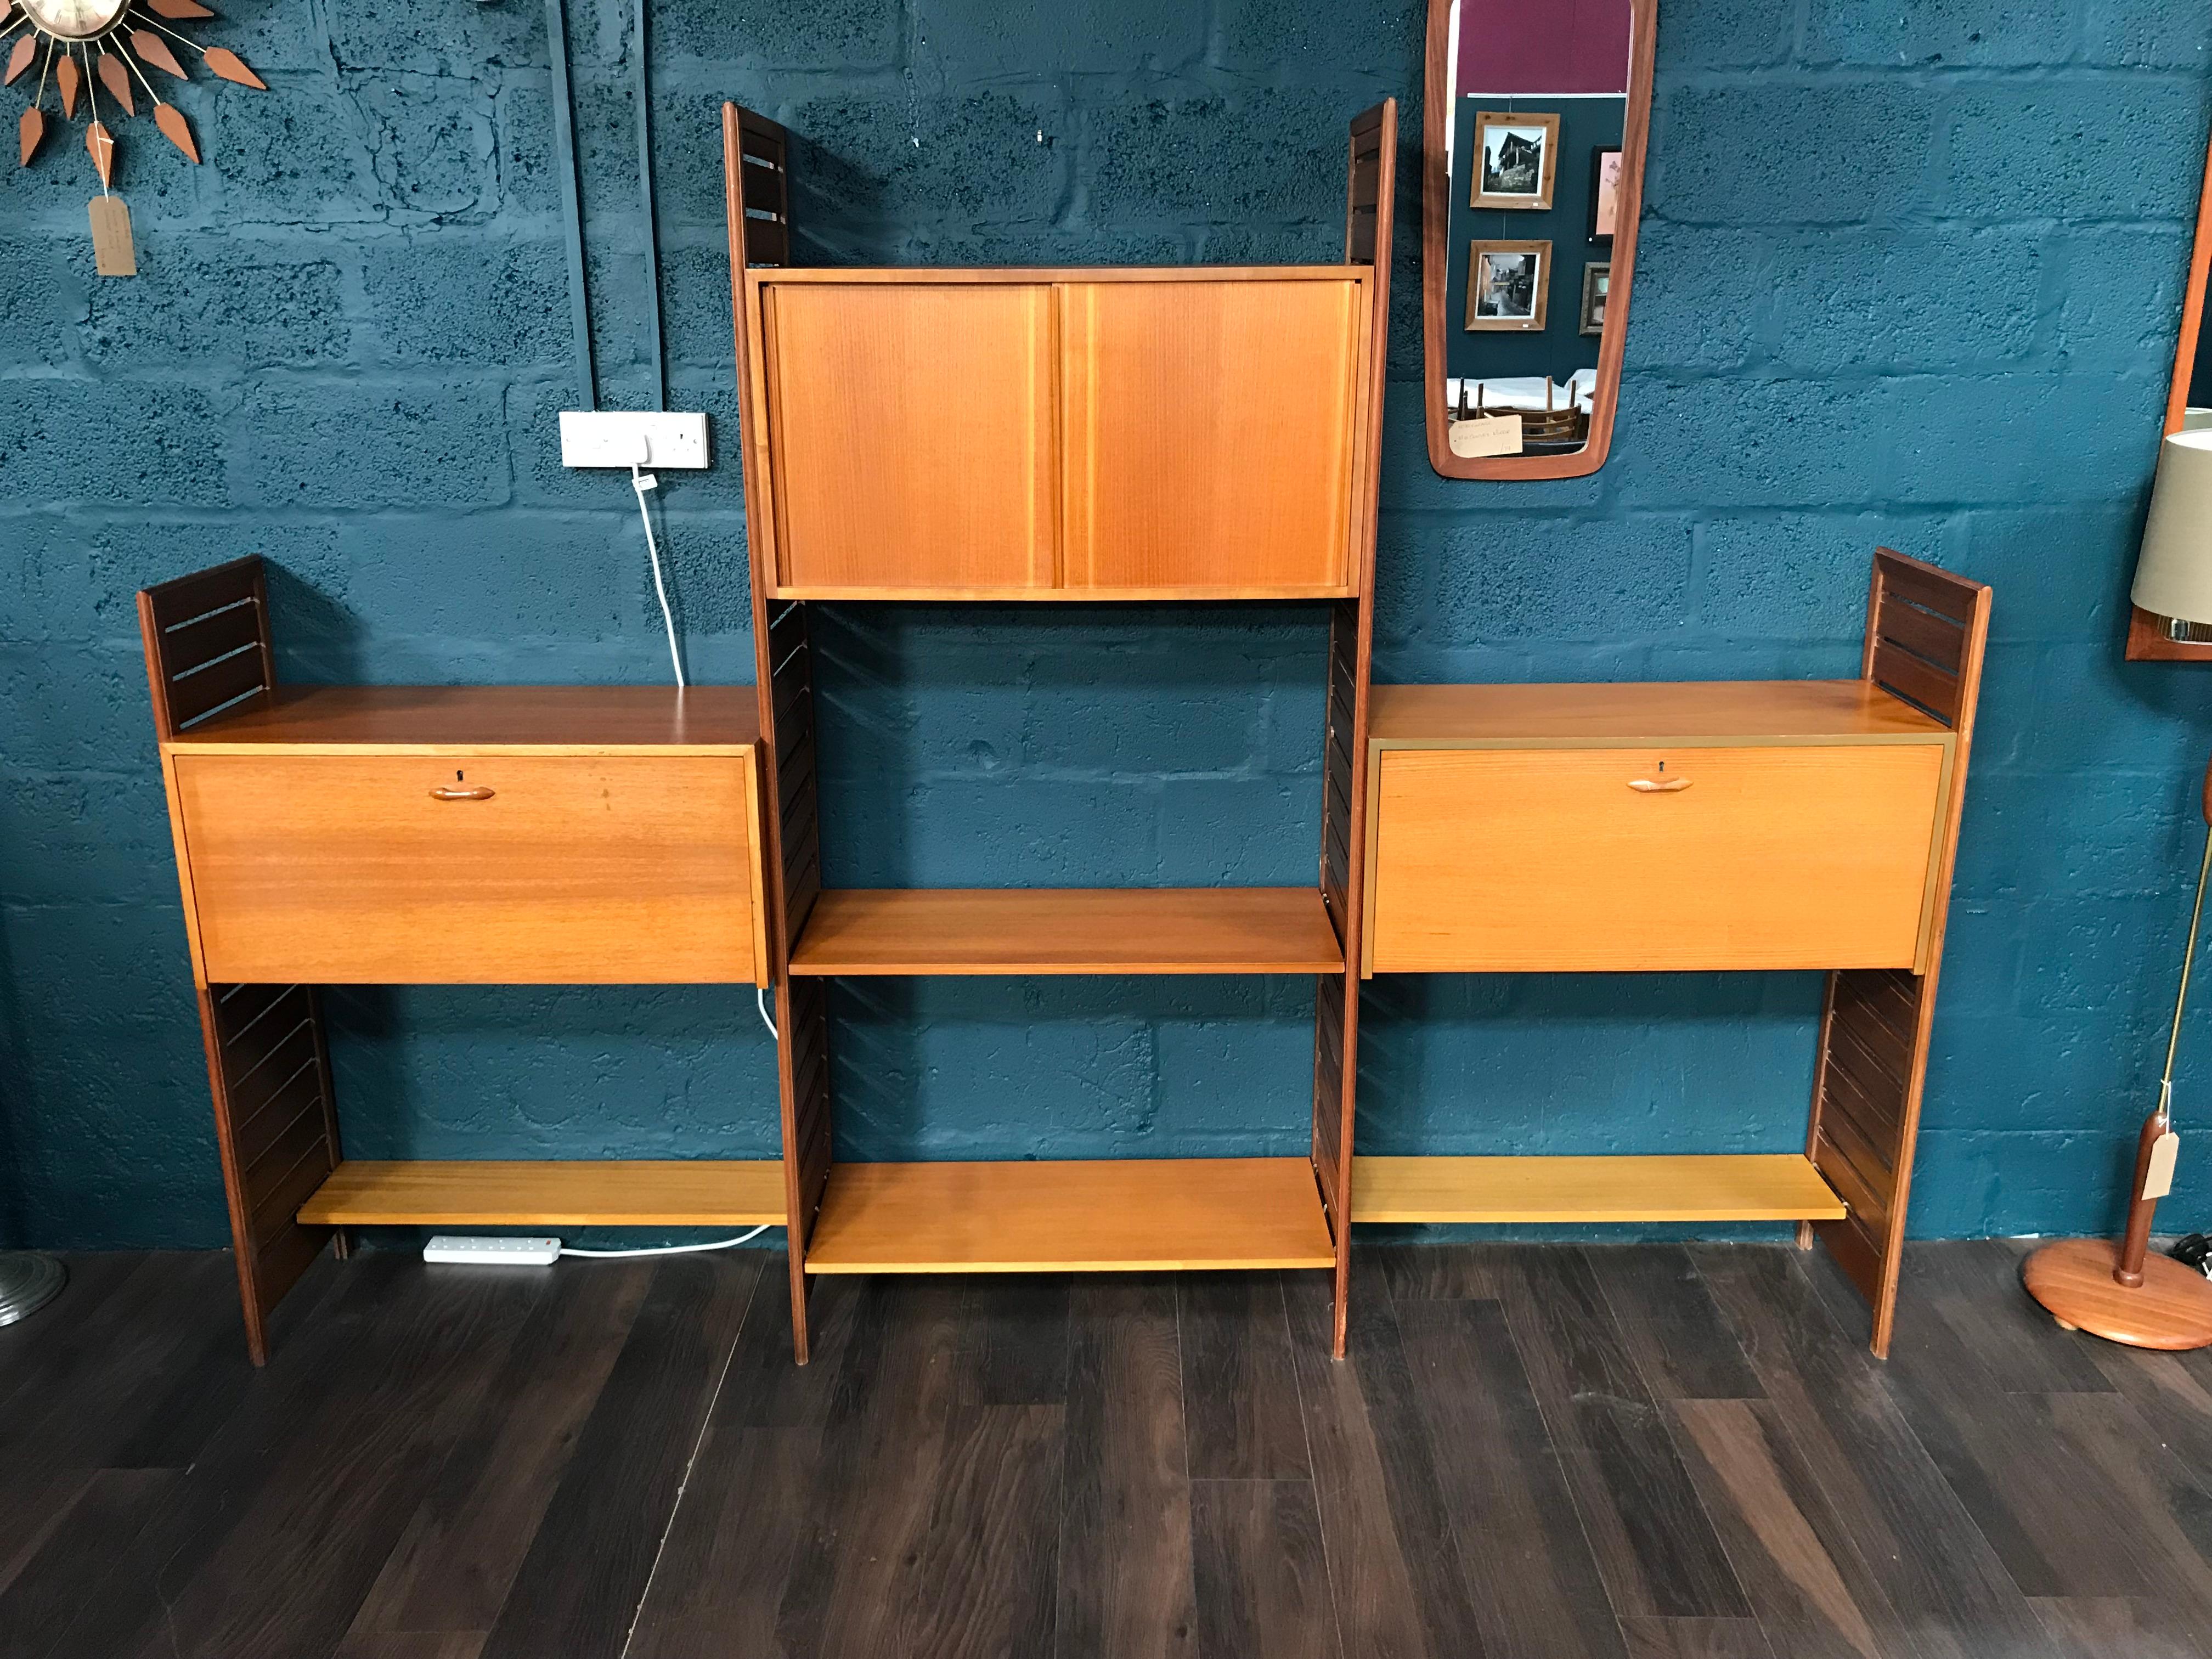 3-Bay Ladderax Teak Midcentury Shelving System by Robert Heal for Staples In Good Condition For Sale In Glasgow, GB